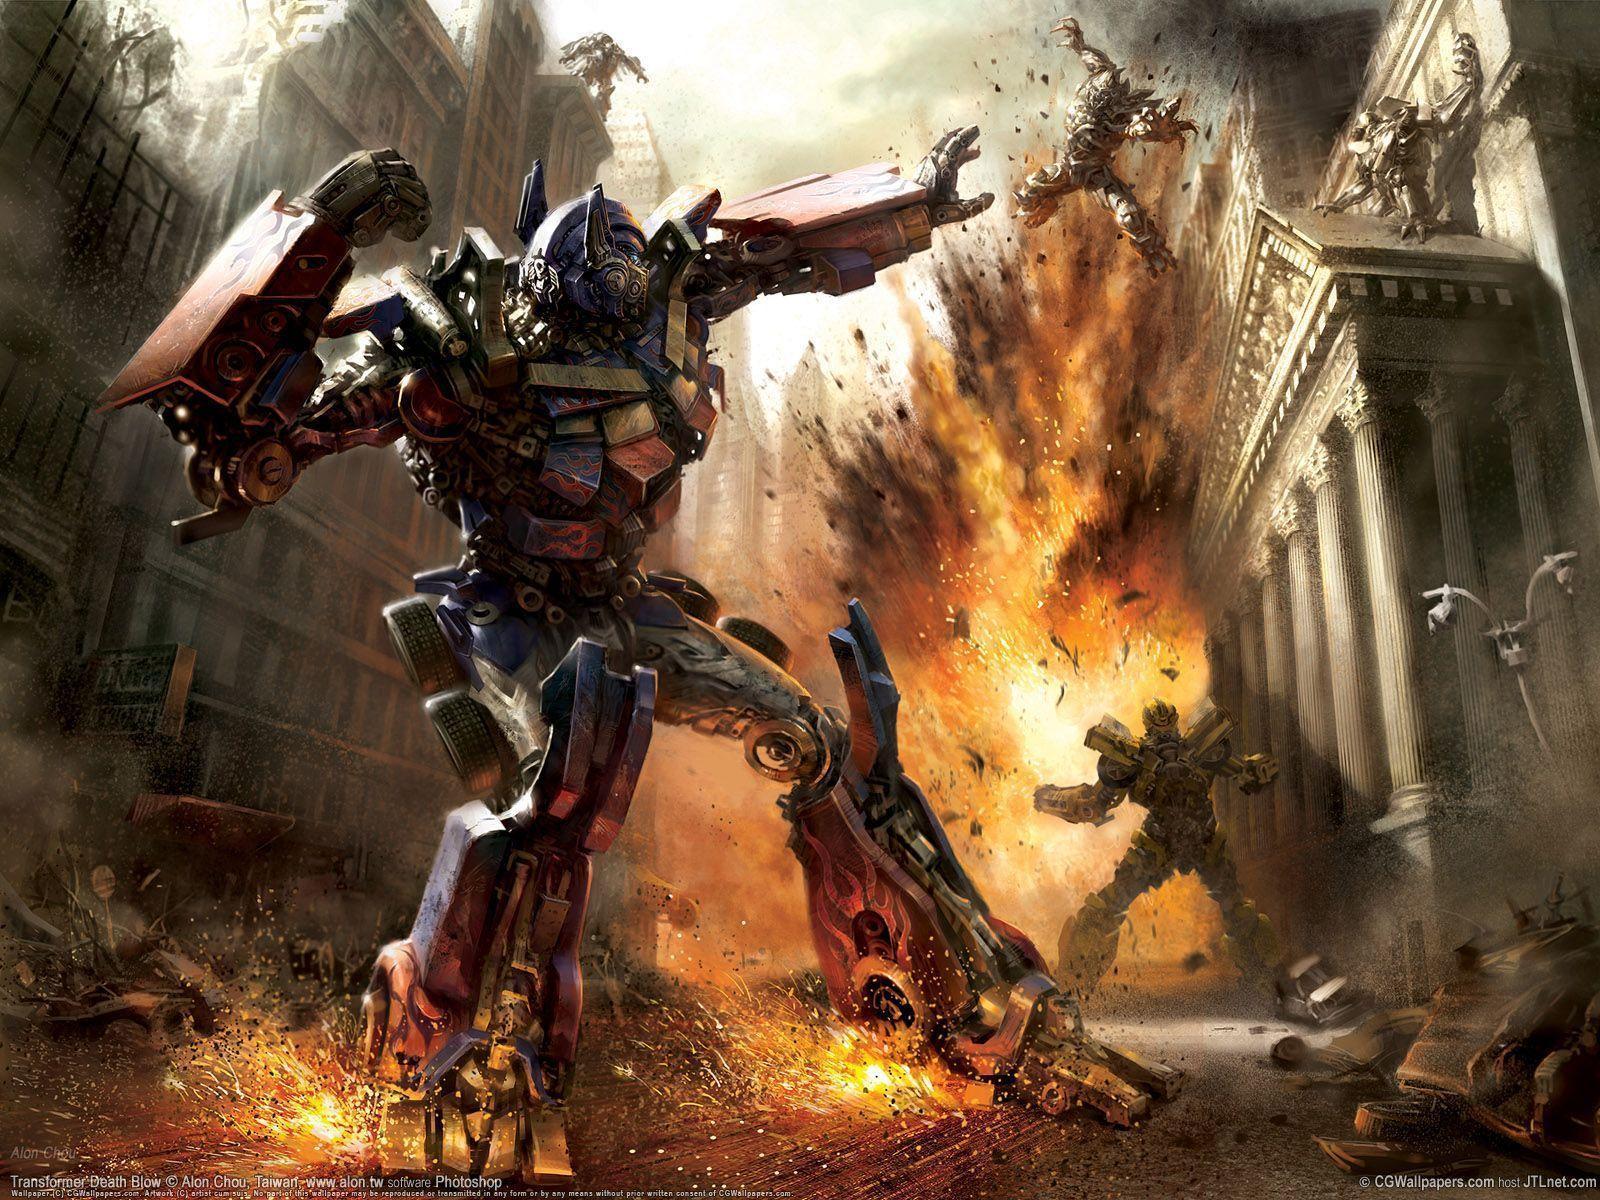 Transformer Wallpapers Widescreen 28807 Hd Wallpapers in Movies